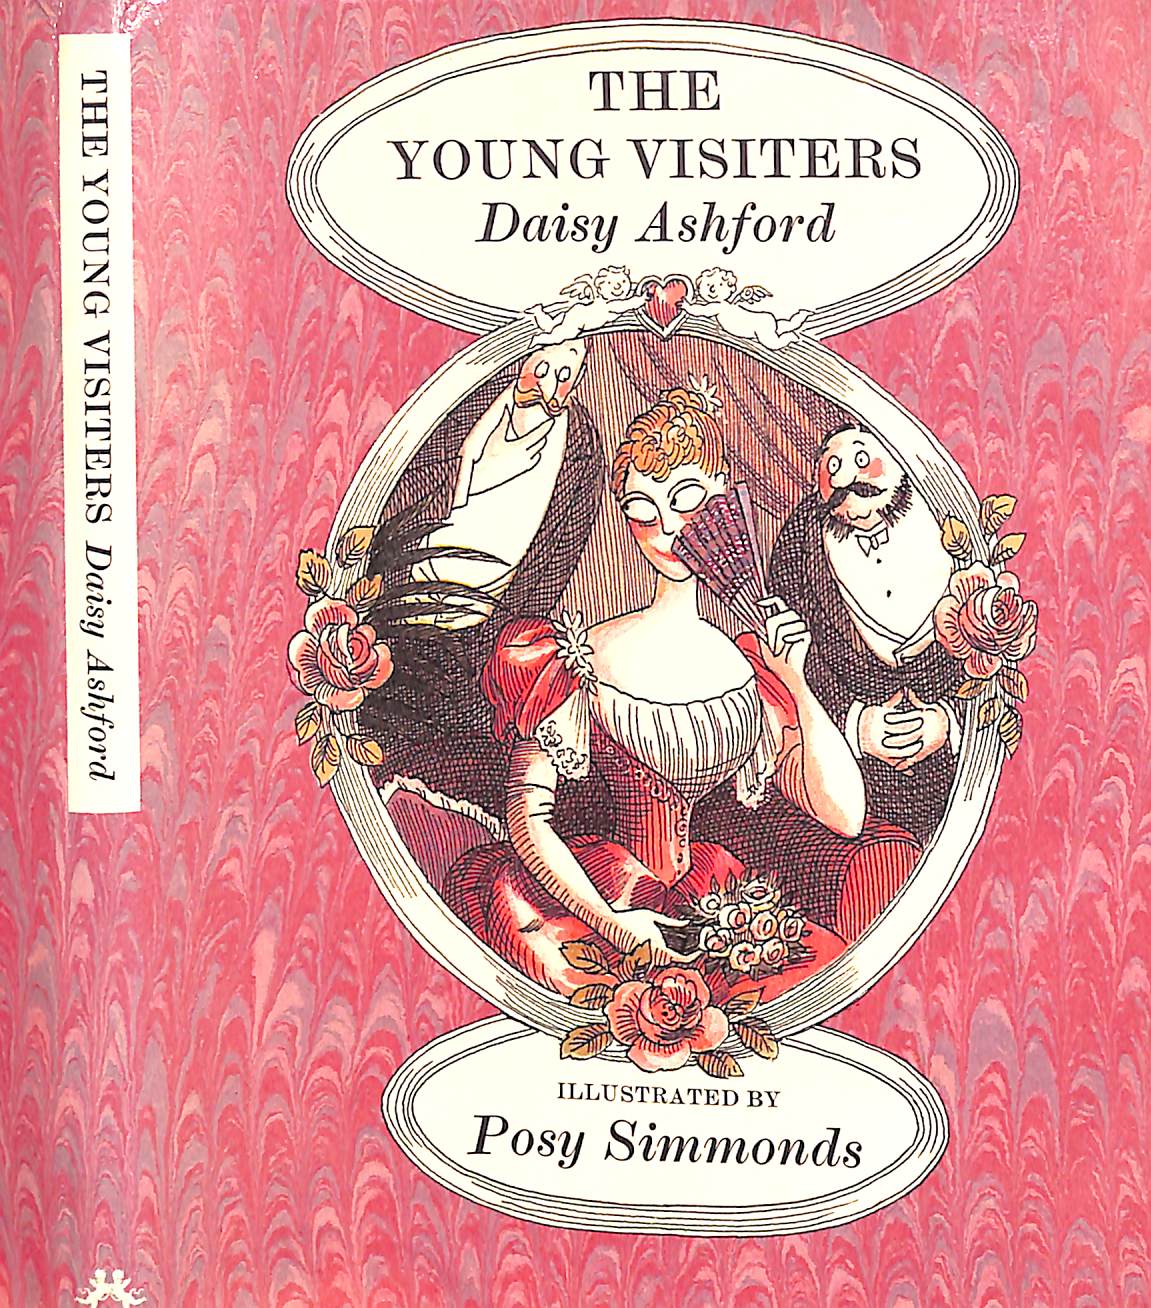 "The Young Visiters Or Mr Salteena's Plan" 1995 ASHFORD, Daisy